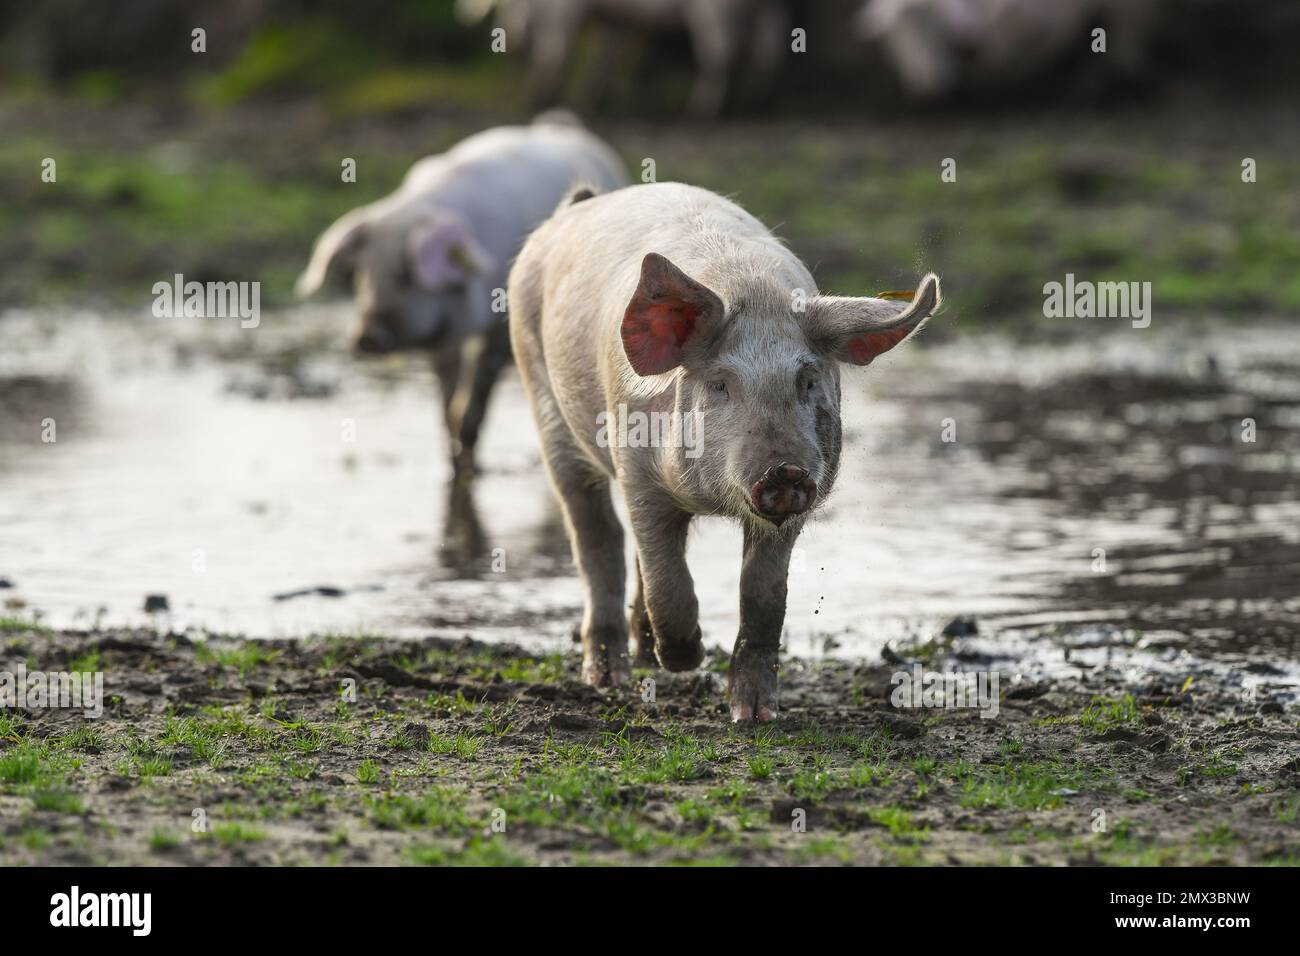 Playful piglets exploring the New Forest during pannage season, the piglets found a dogs ball and have been playing with it. Stock Photo